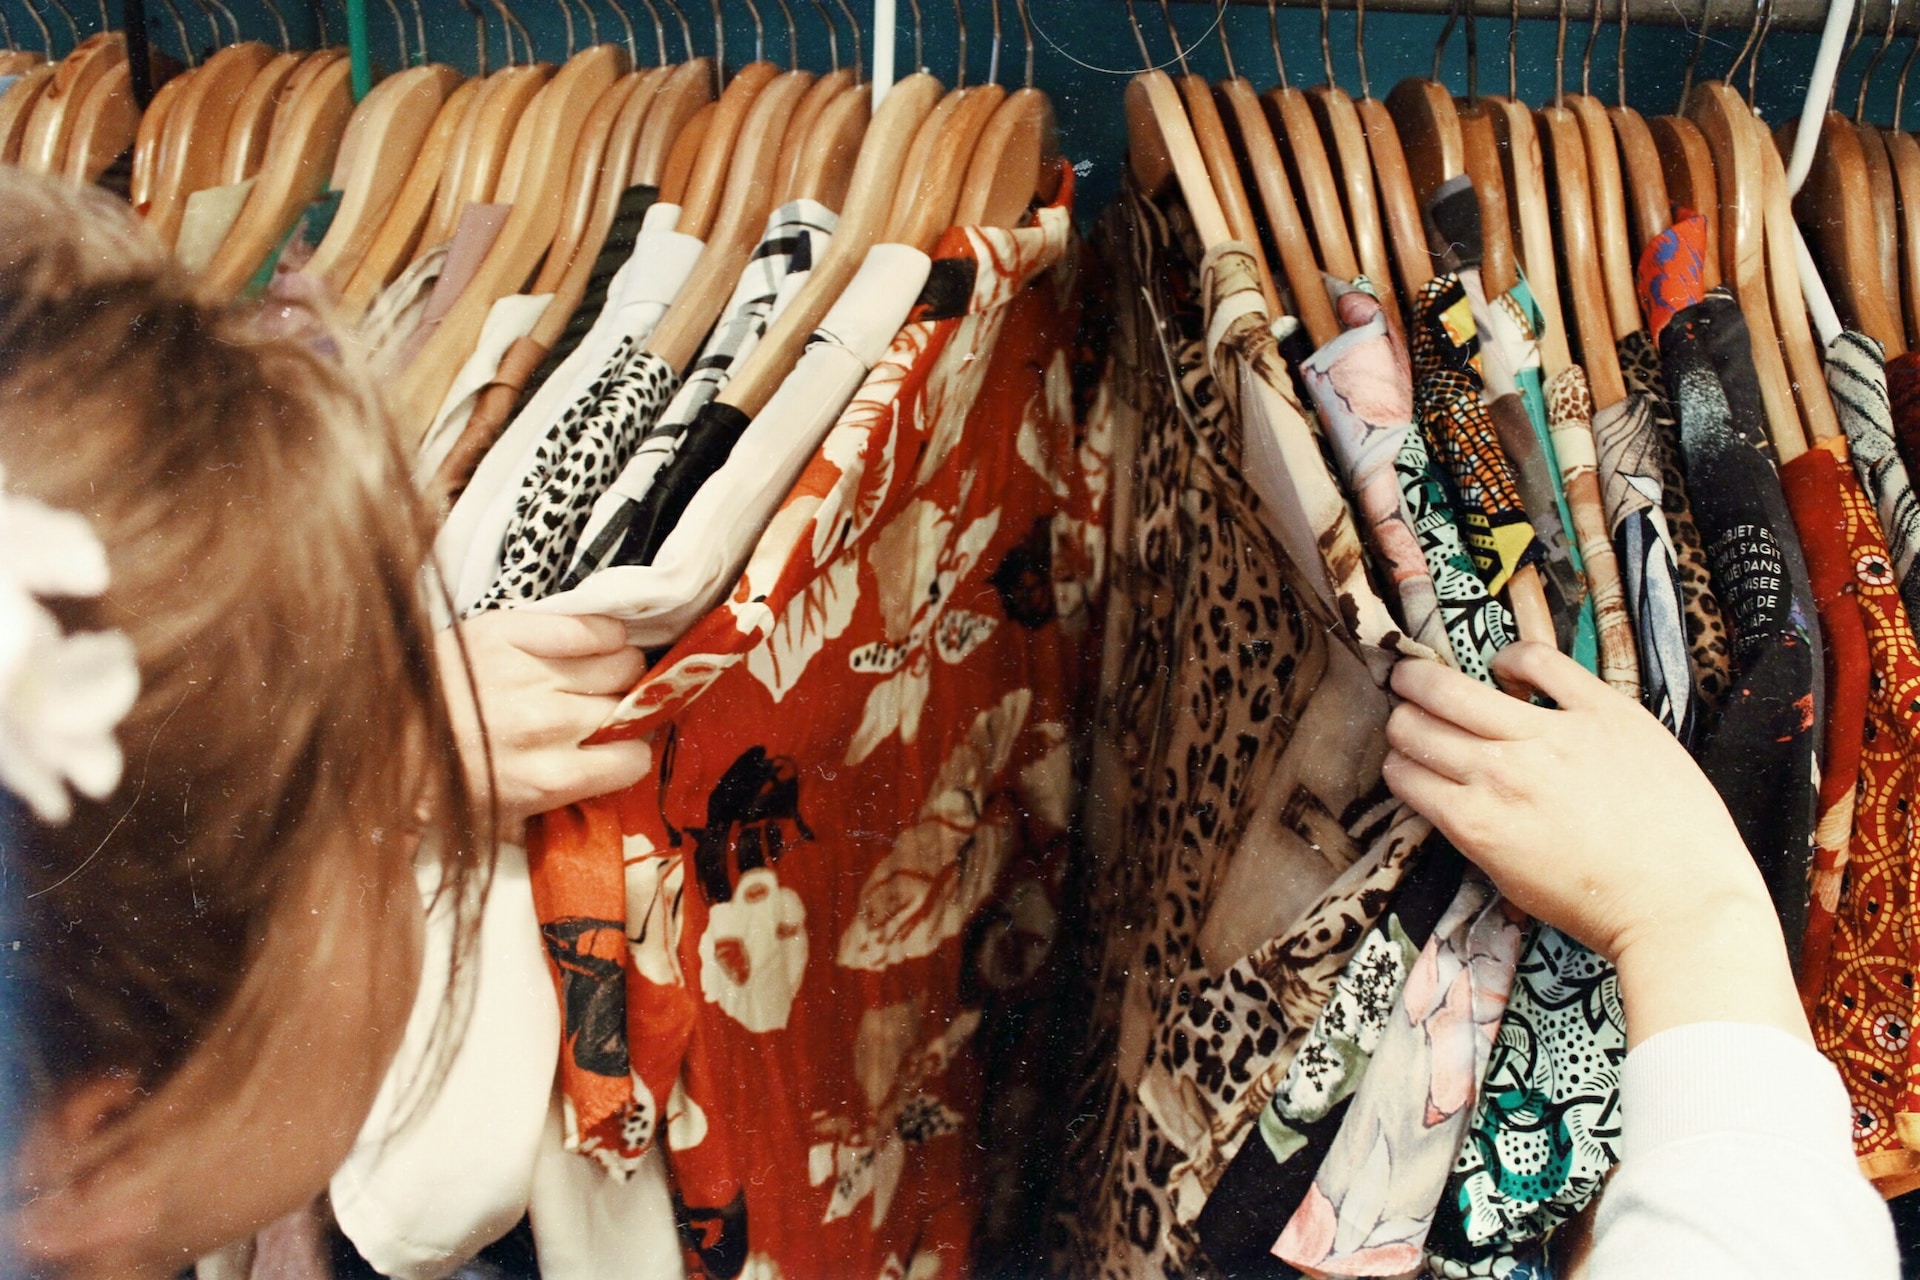 a woman browsing racks of second-hand clothing at thrift stores in kelowna